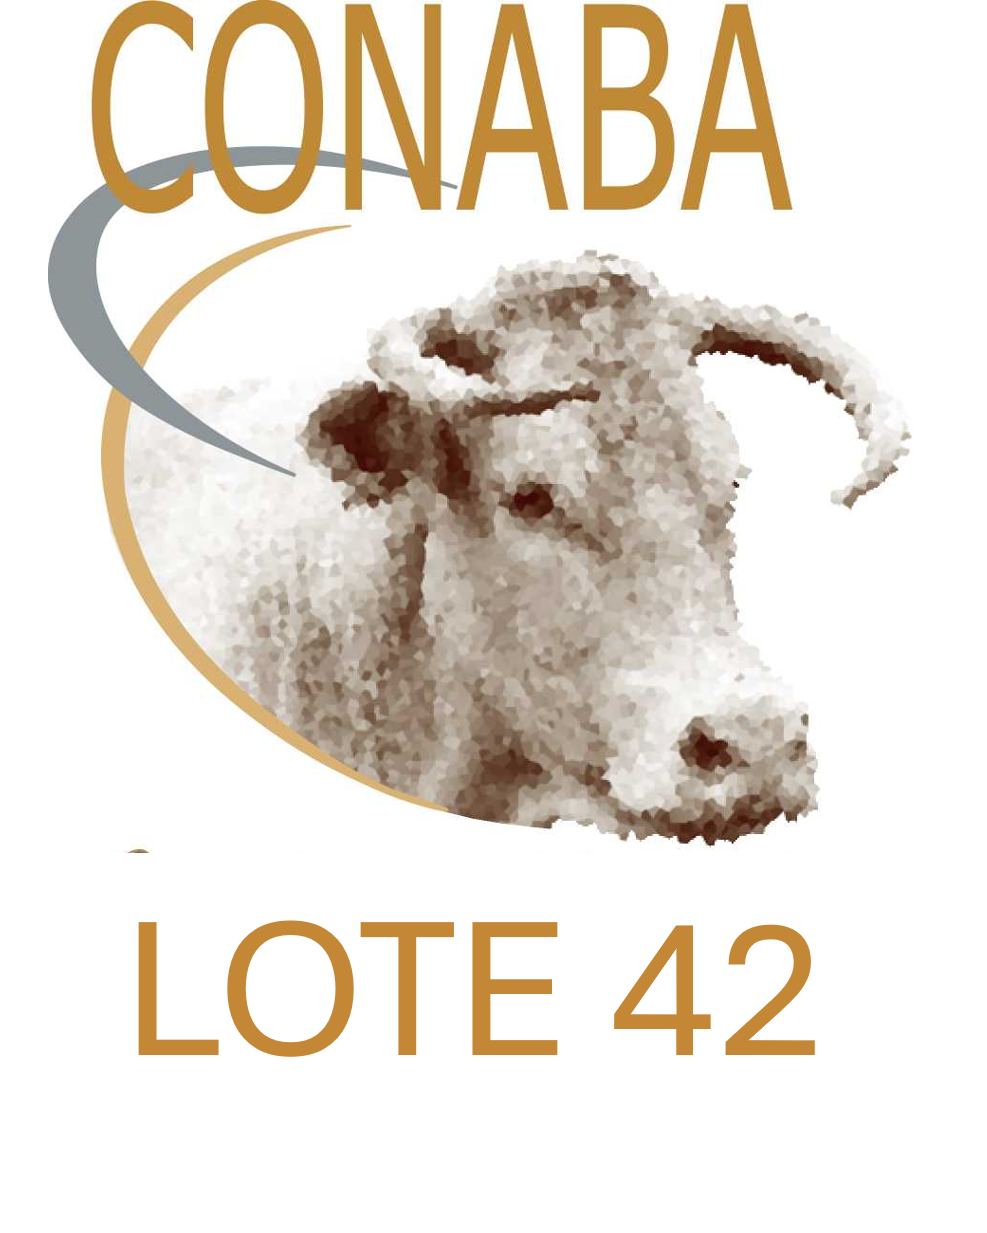 LOTE 42